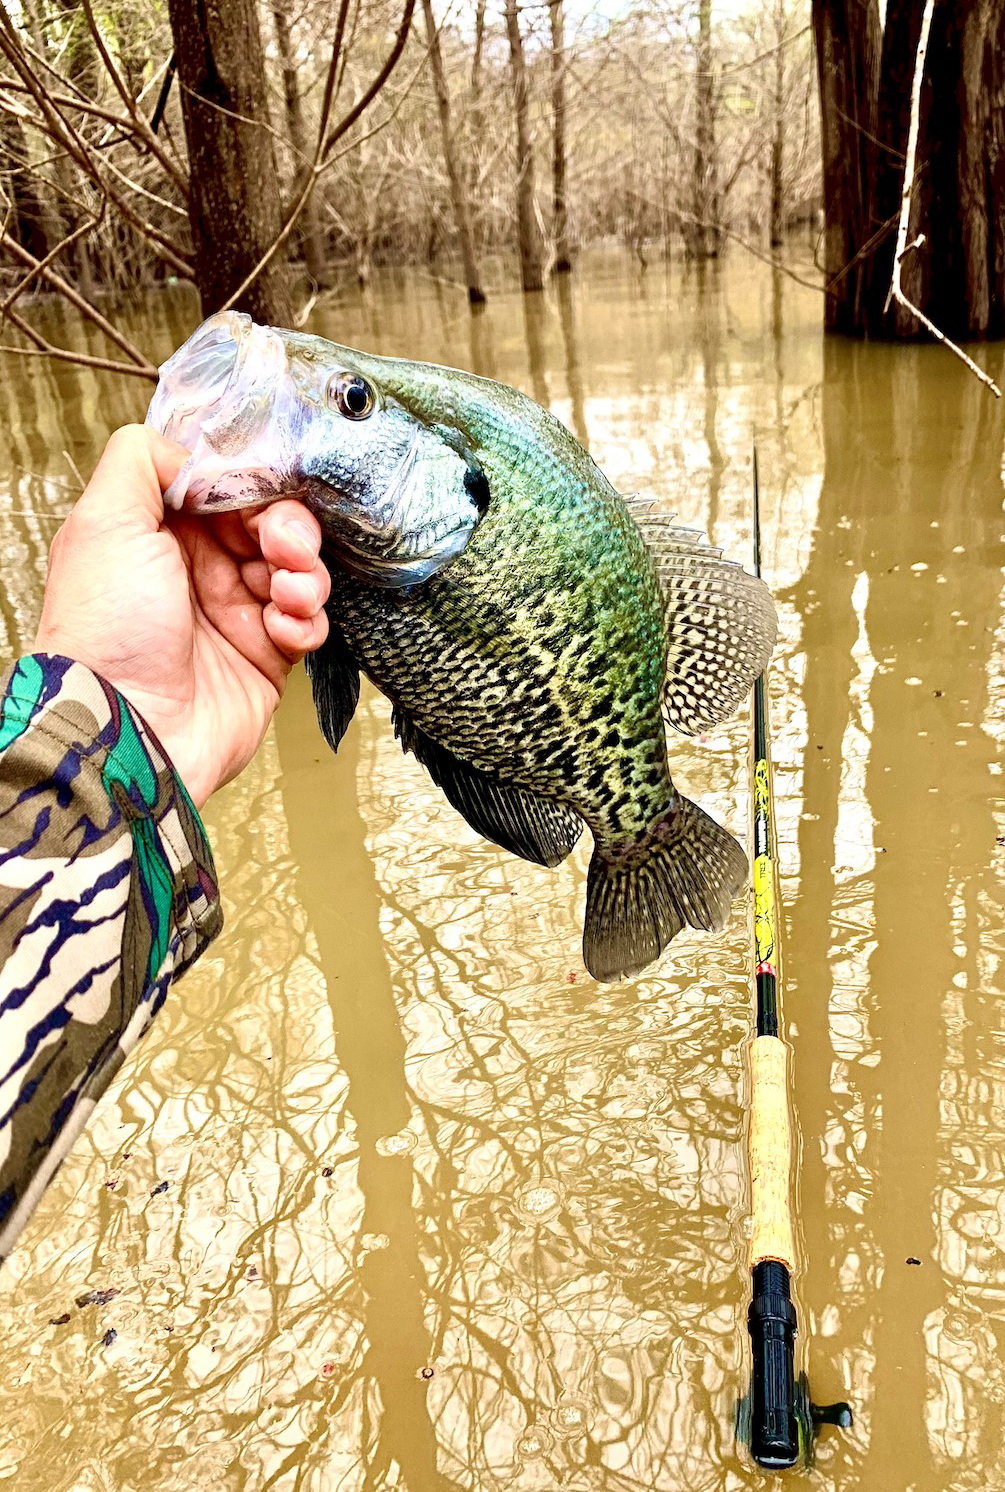 North Mississippi Wade Fishing, by John David Santi - Crappie Now